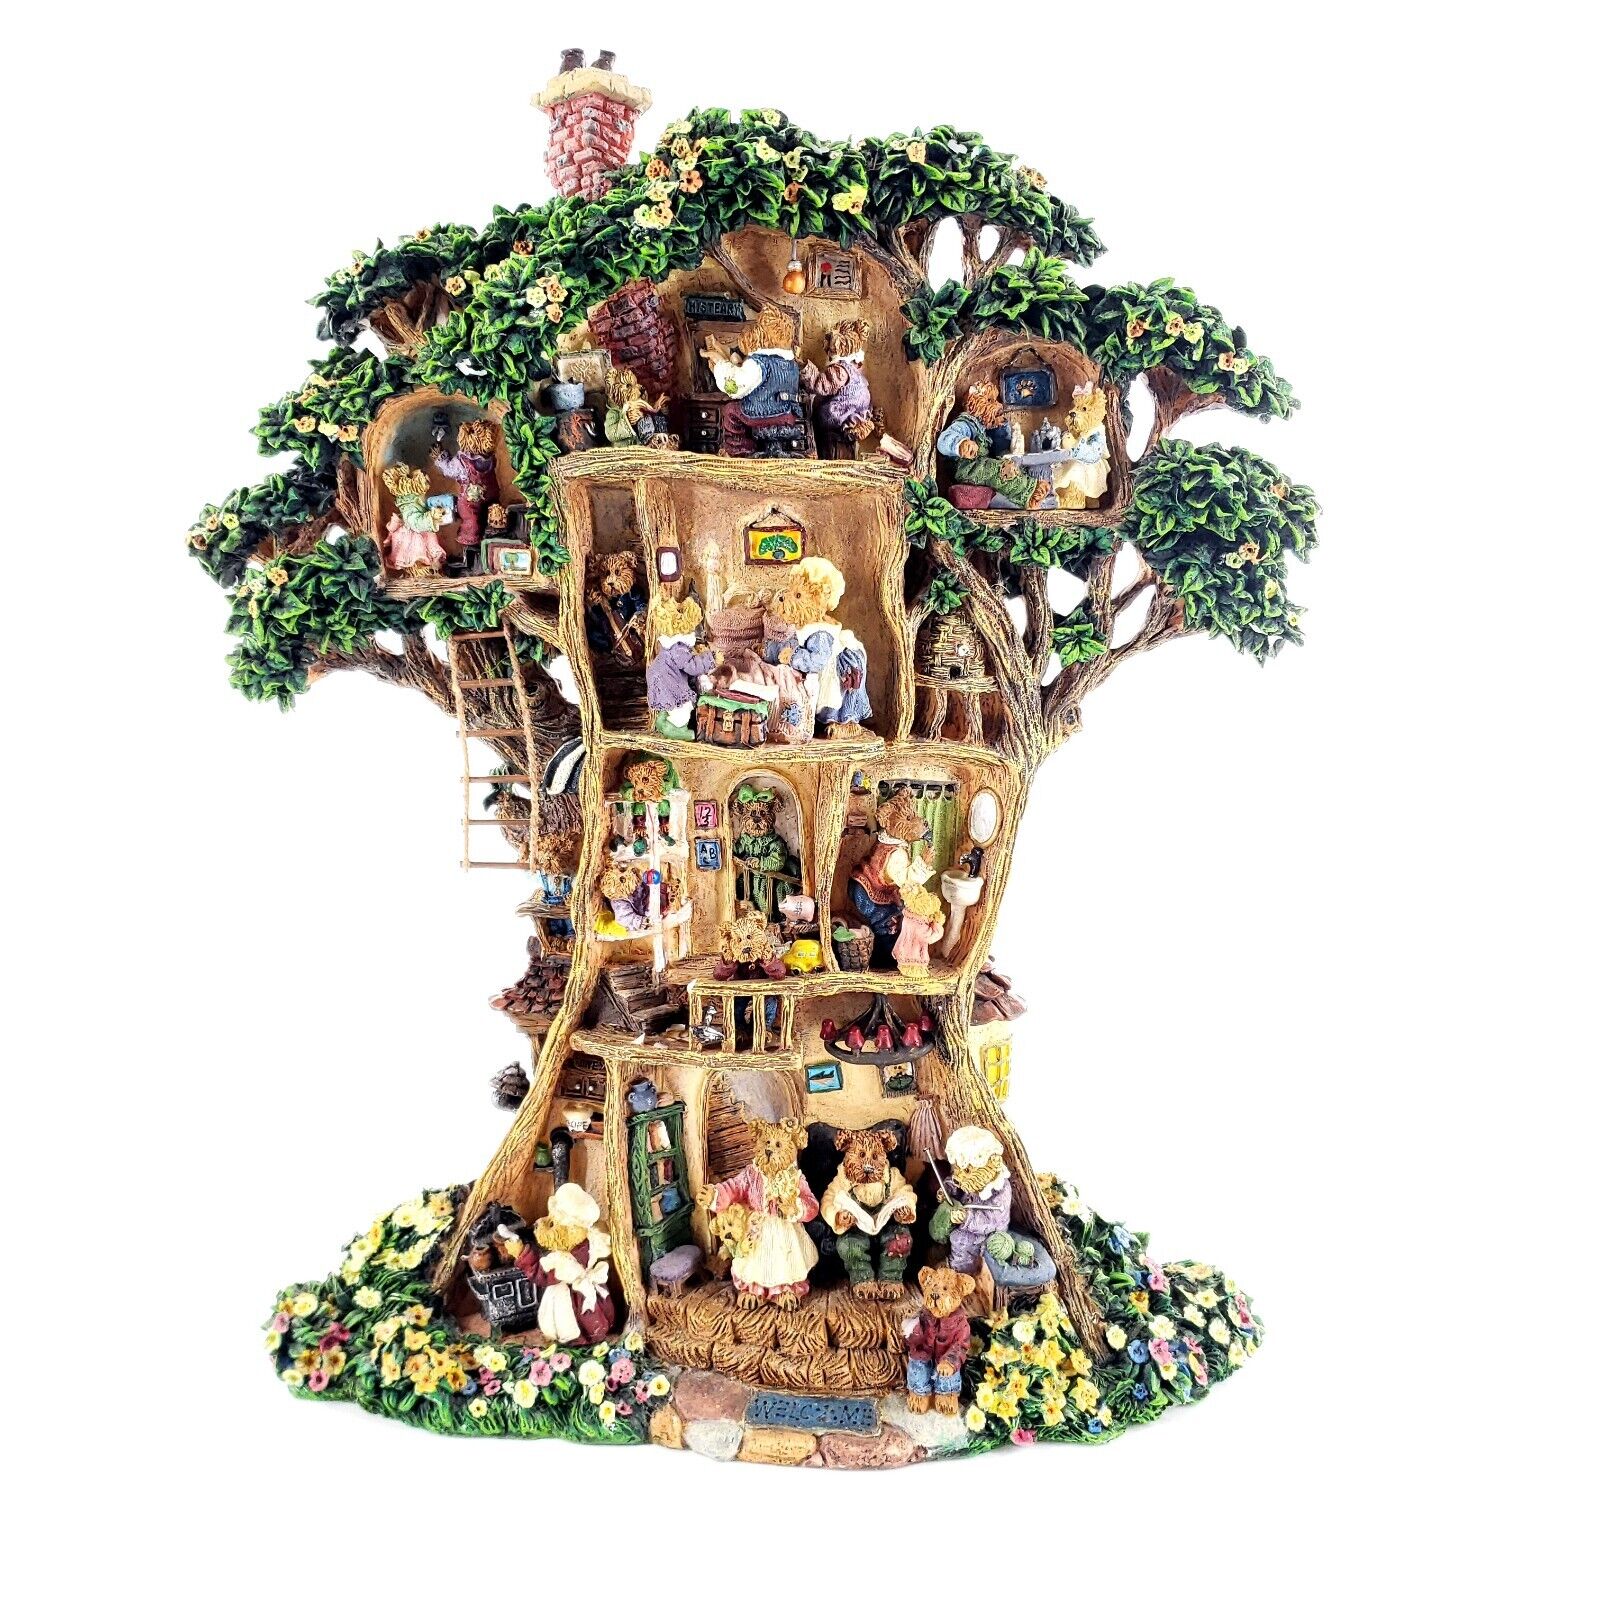 The Boyd’s Bears Treehouse Wall Plaque Tabletop Display Sculpture Danbury *READ*